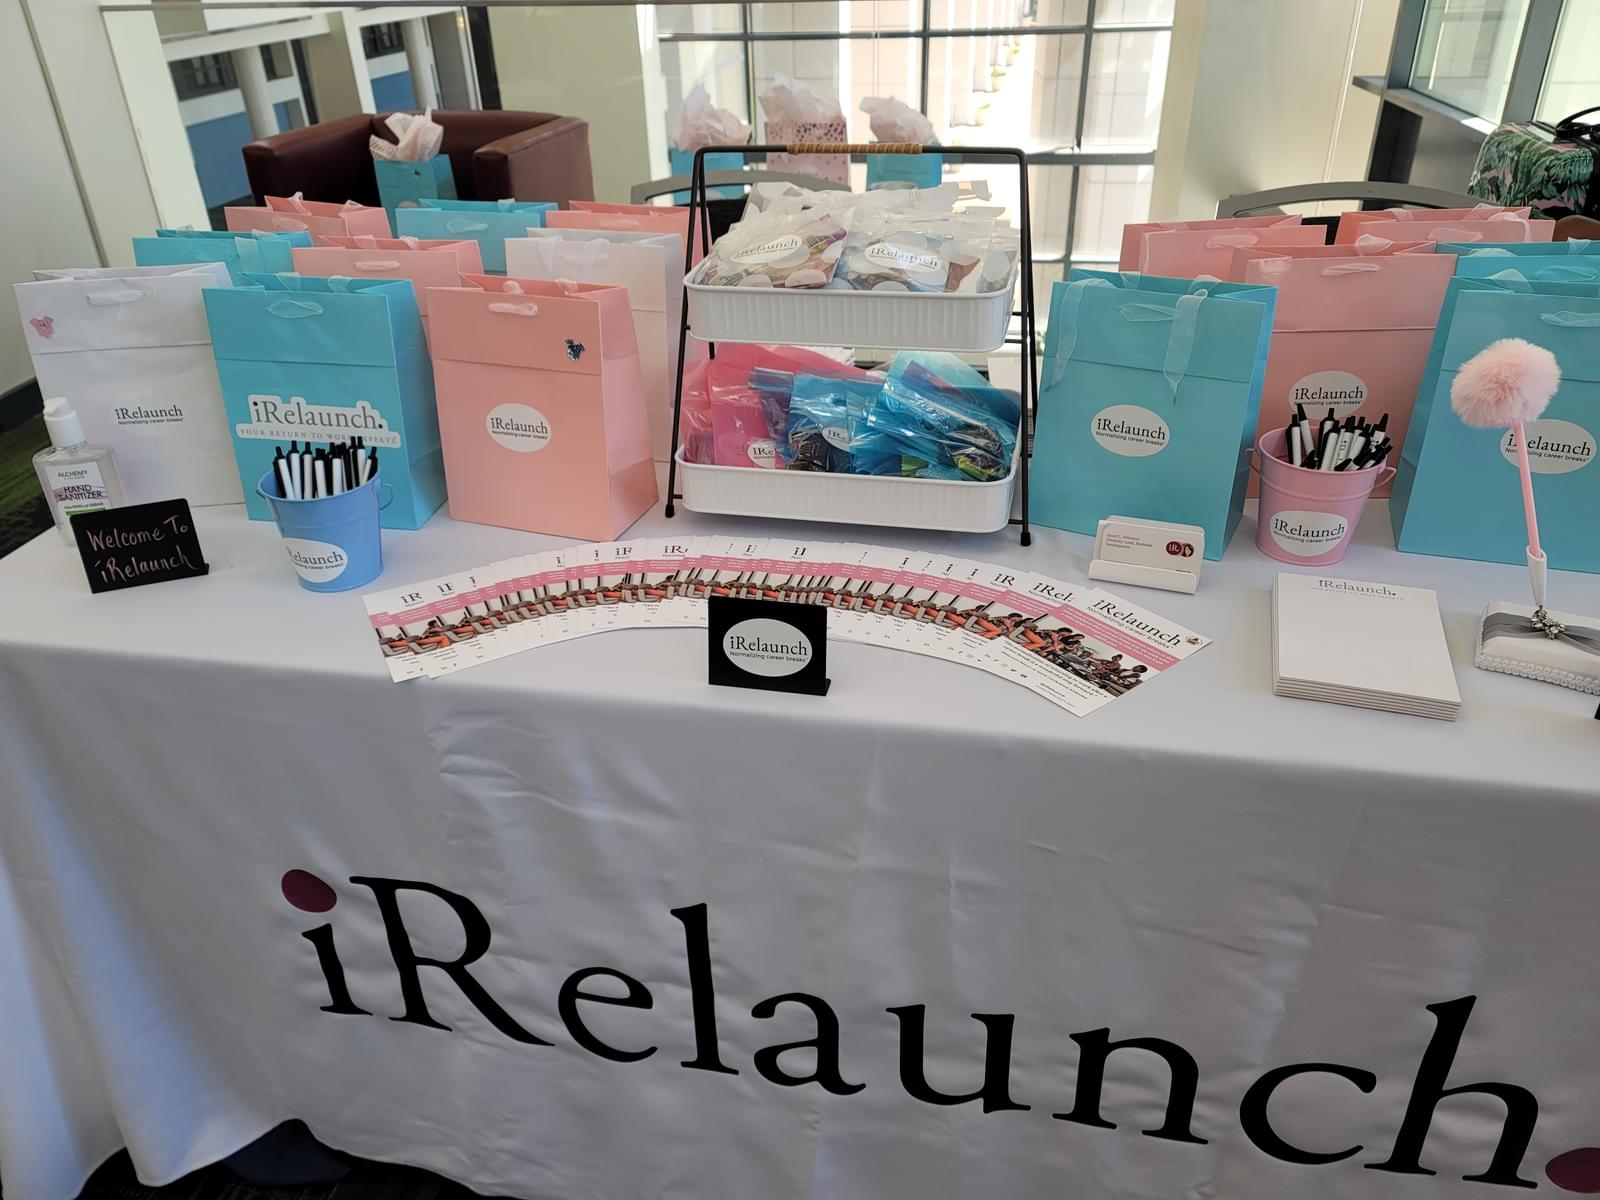 I Relaunch Exhibit Table at 2022 Jack and Jill Mothers Work Conference